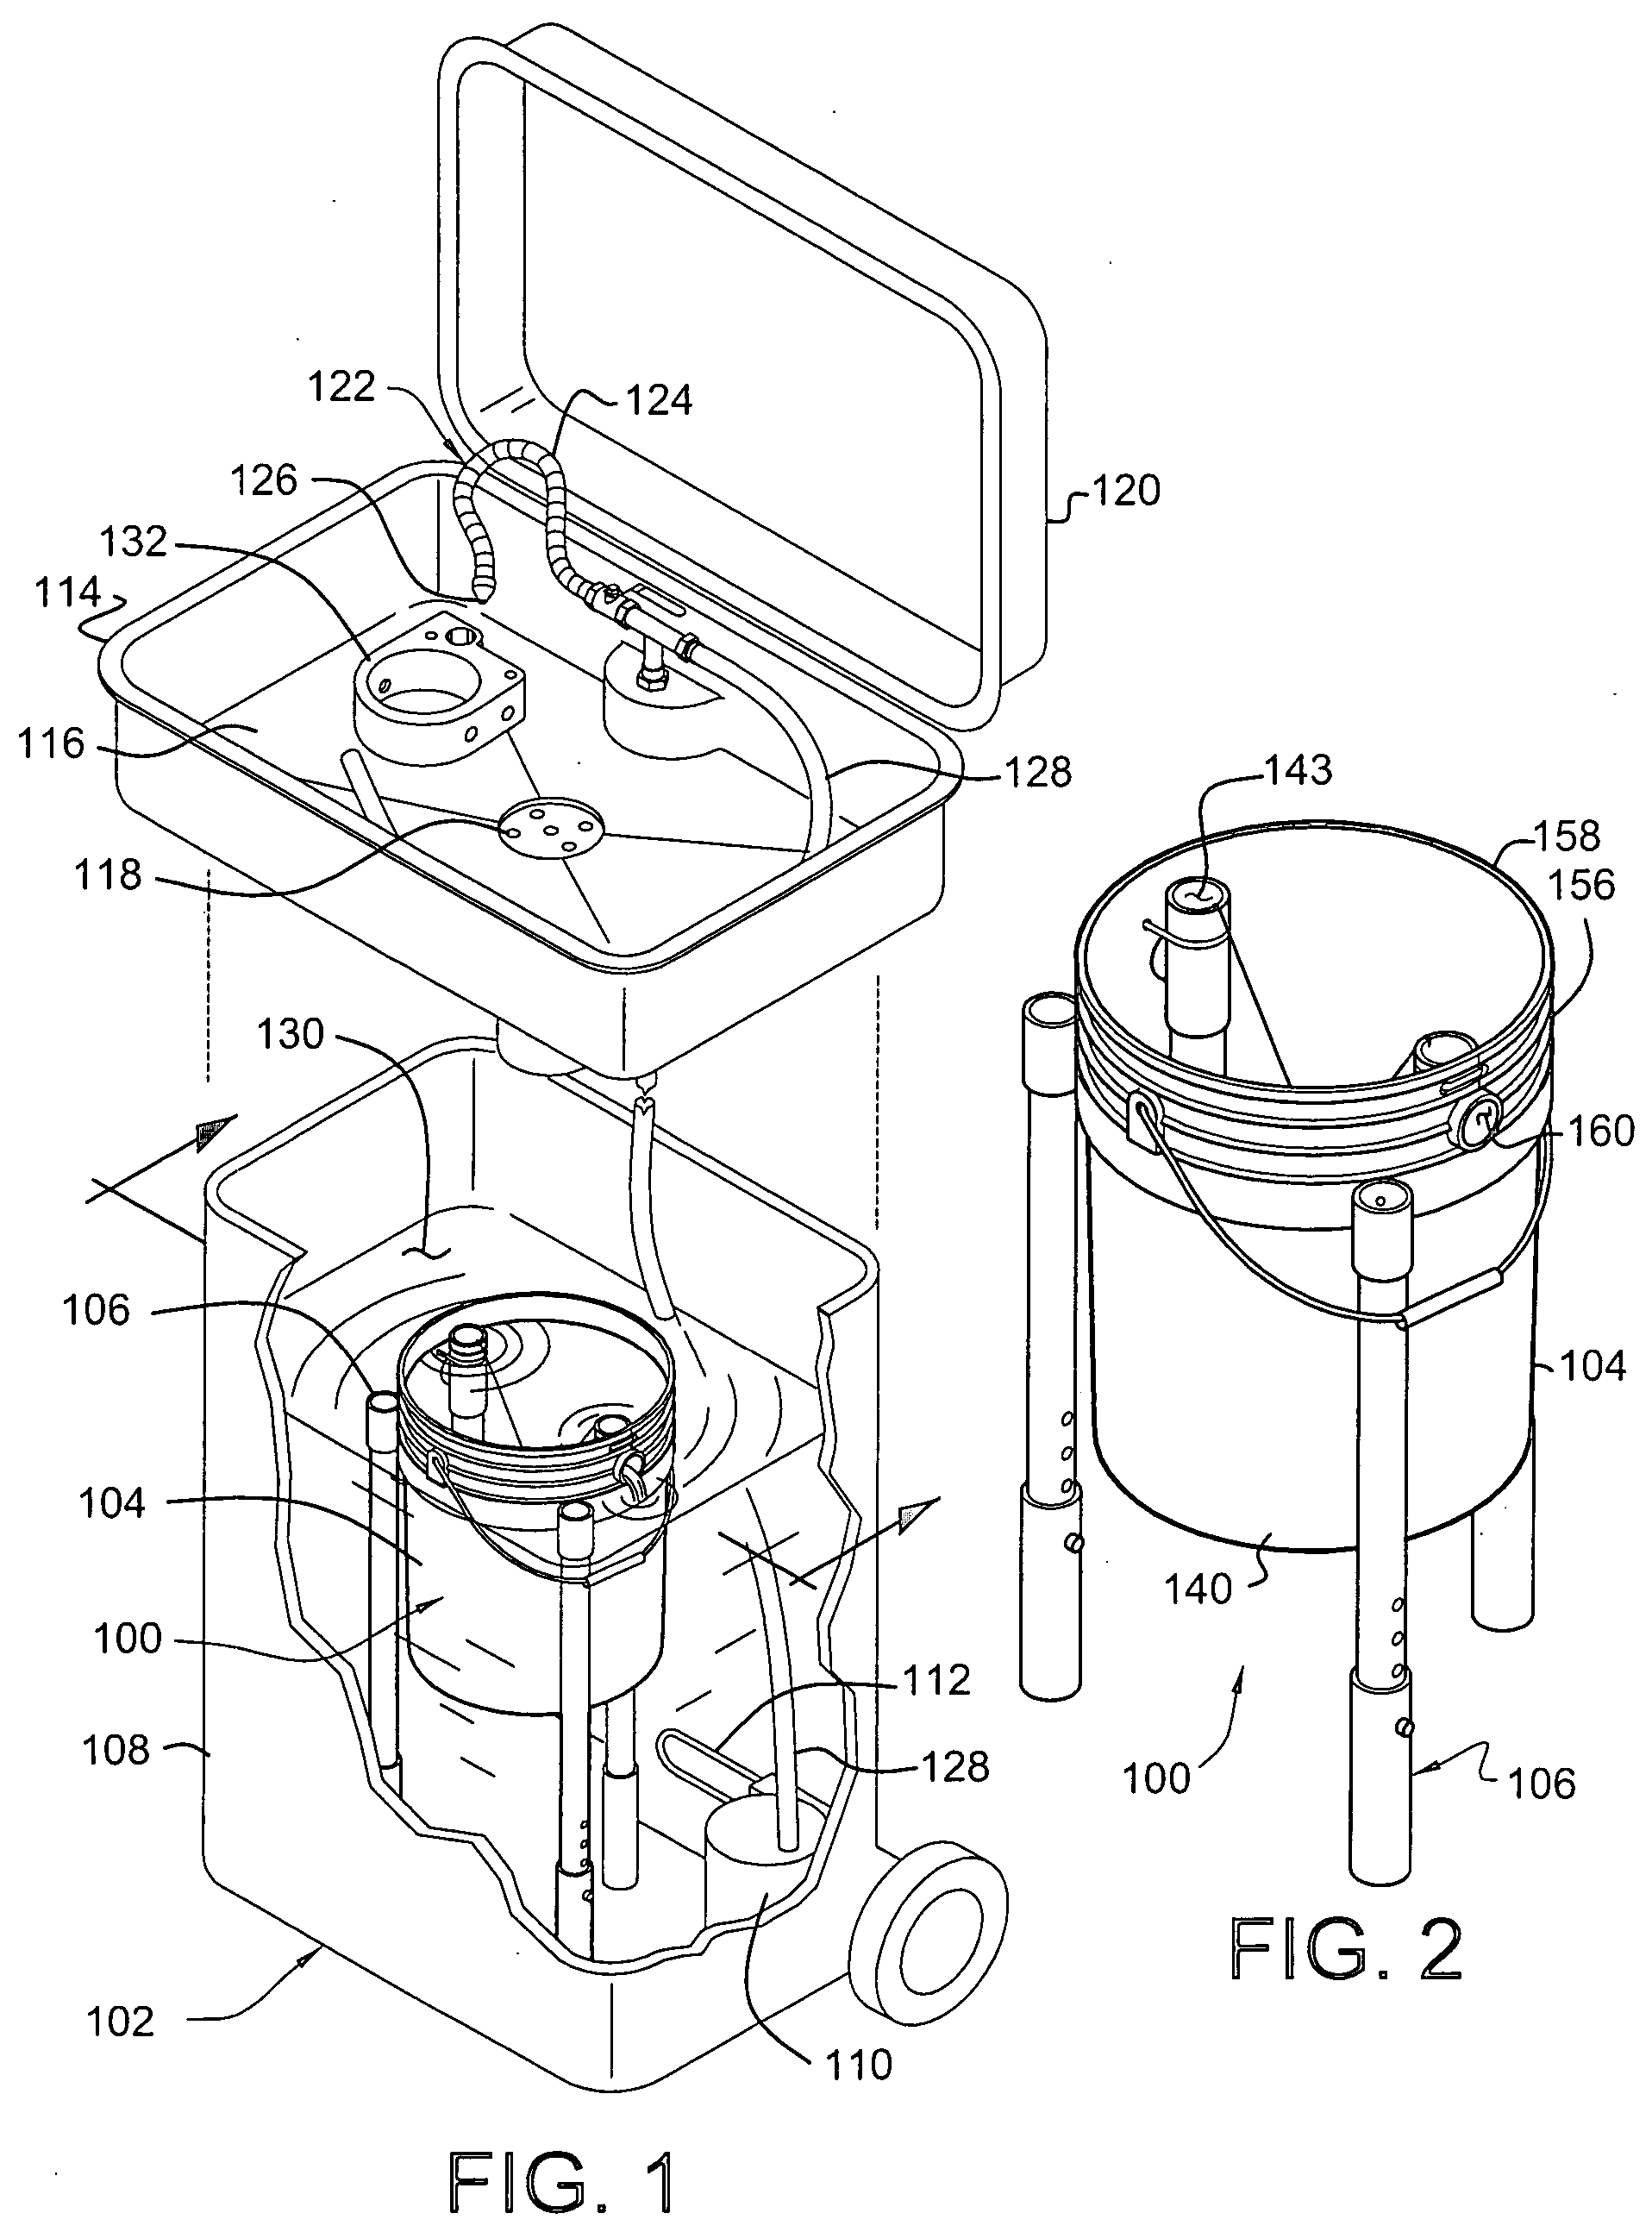 Portable purifying system